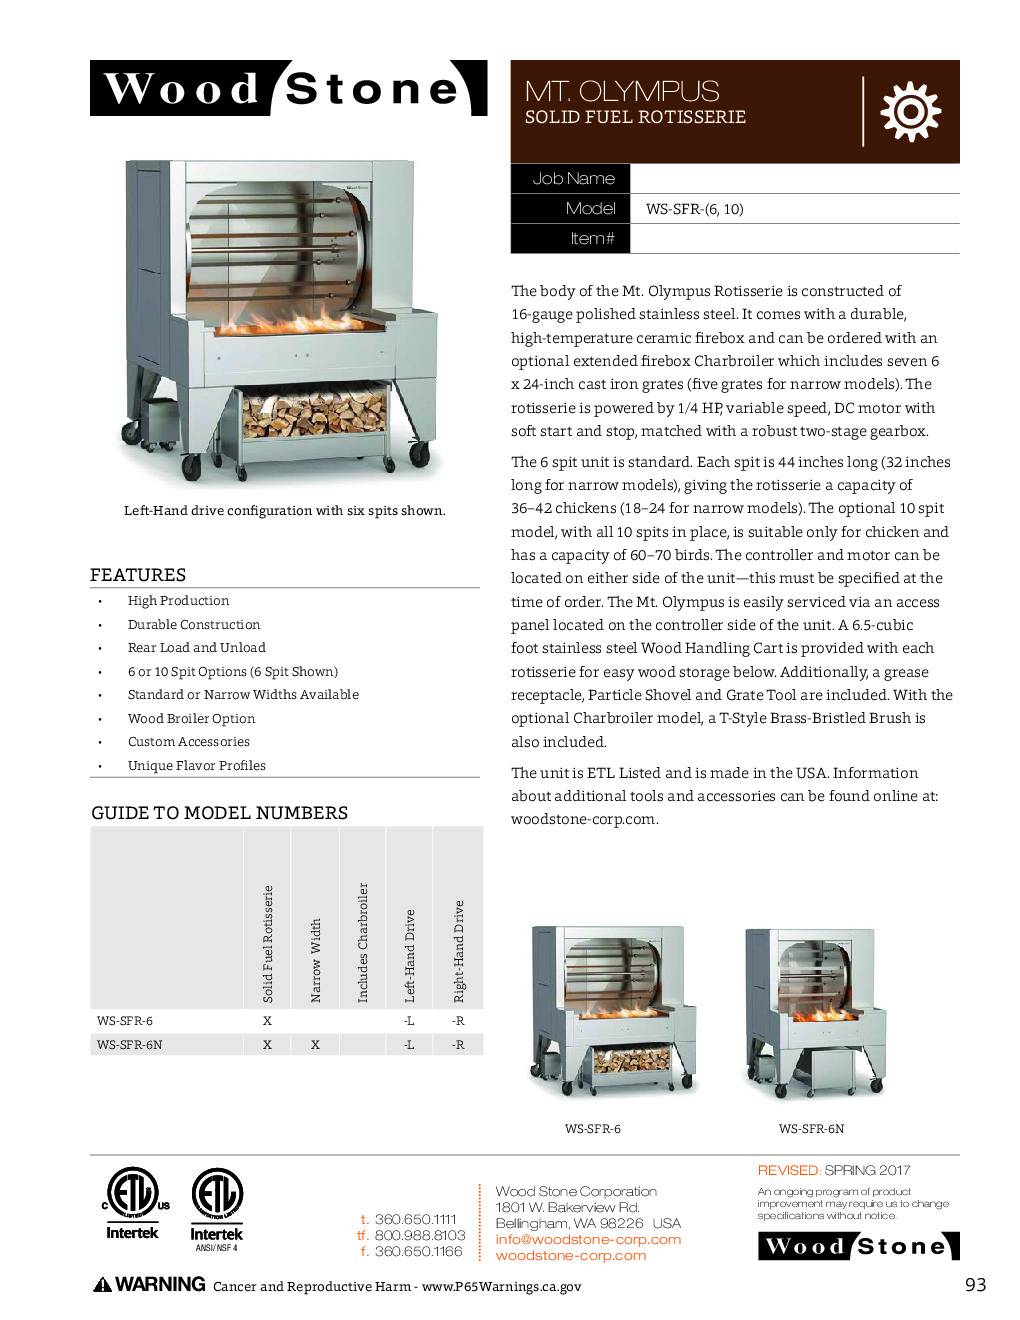 Wood Stone WS-SFR-6N Rotisserie Solid-Fuel Oven